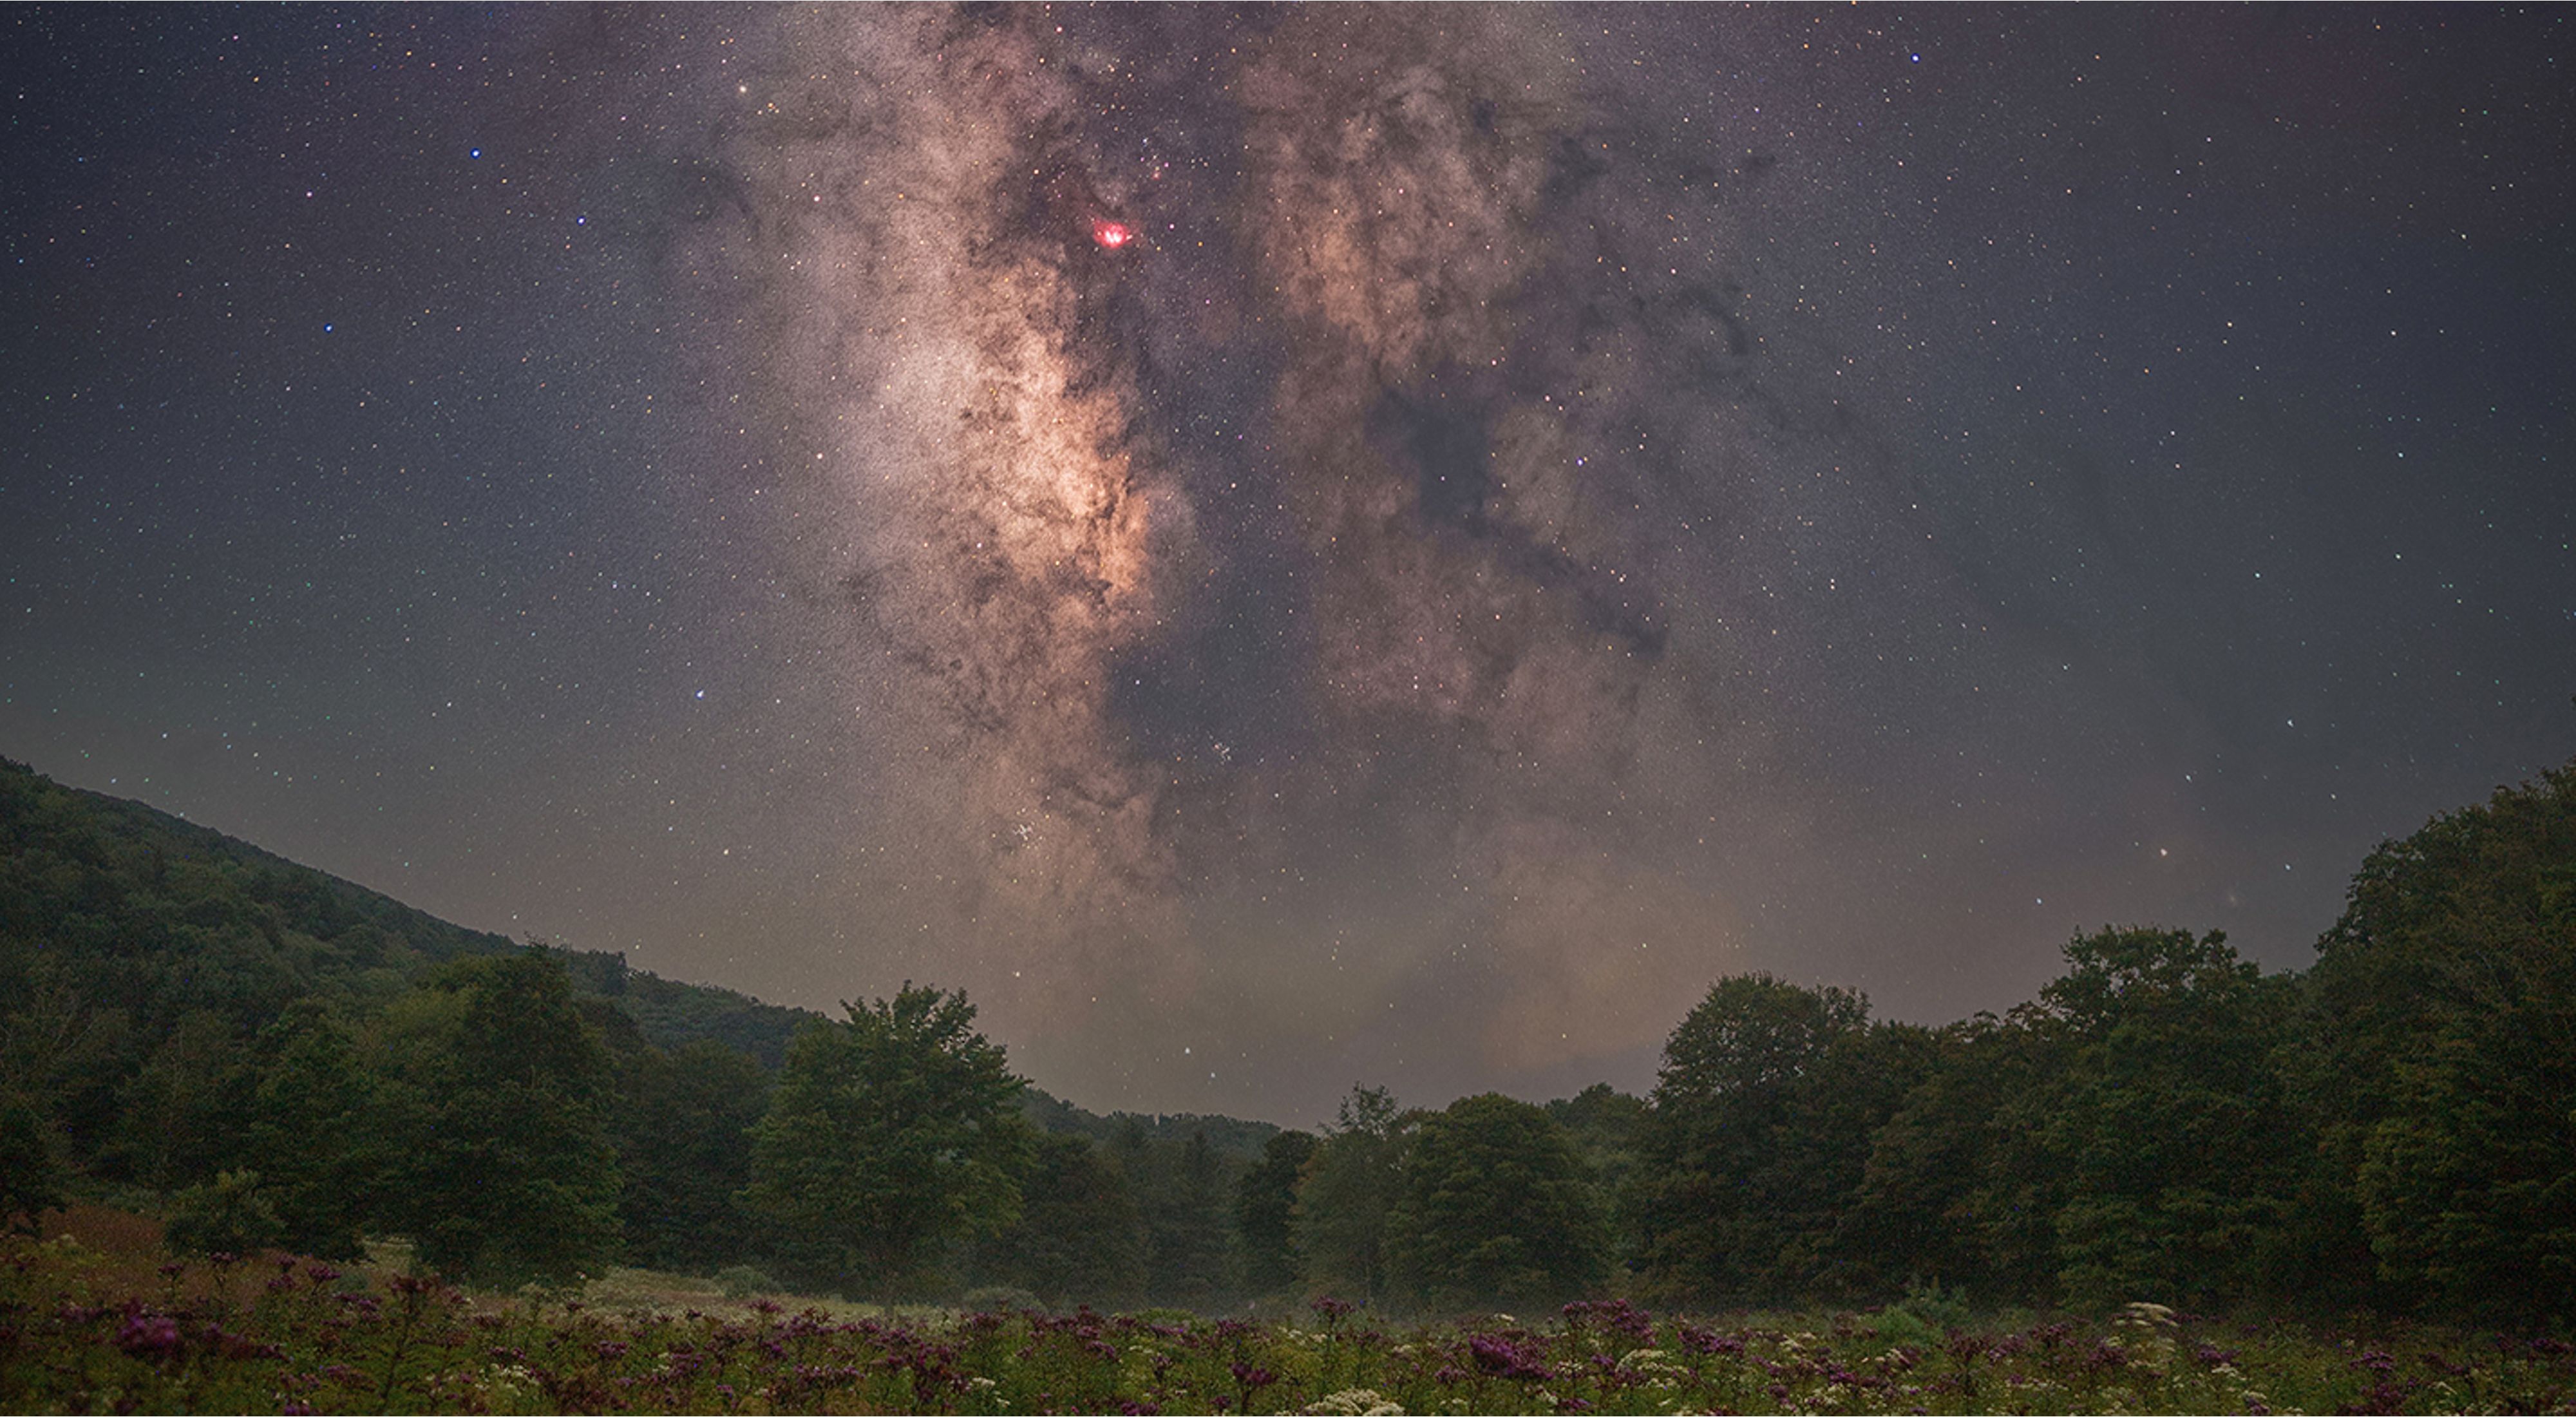 Composite photo showing a column of gas and stars in the night sky over an open field of purple flowers.